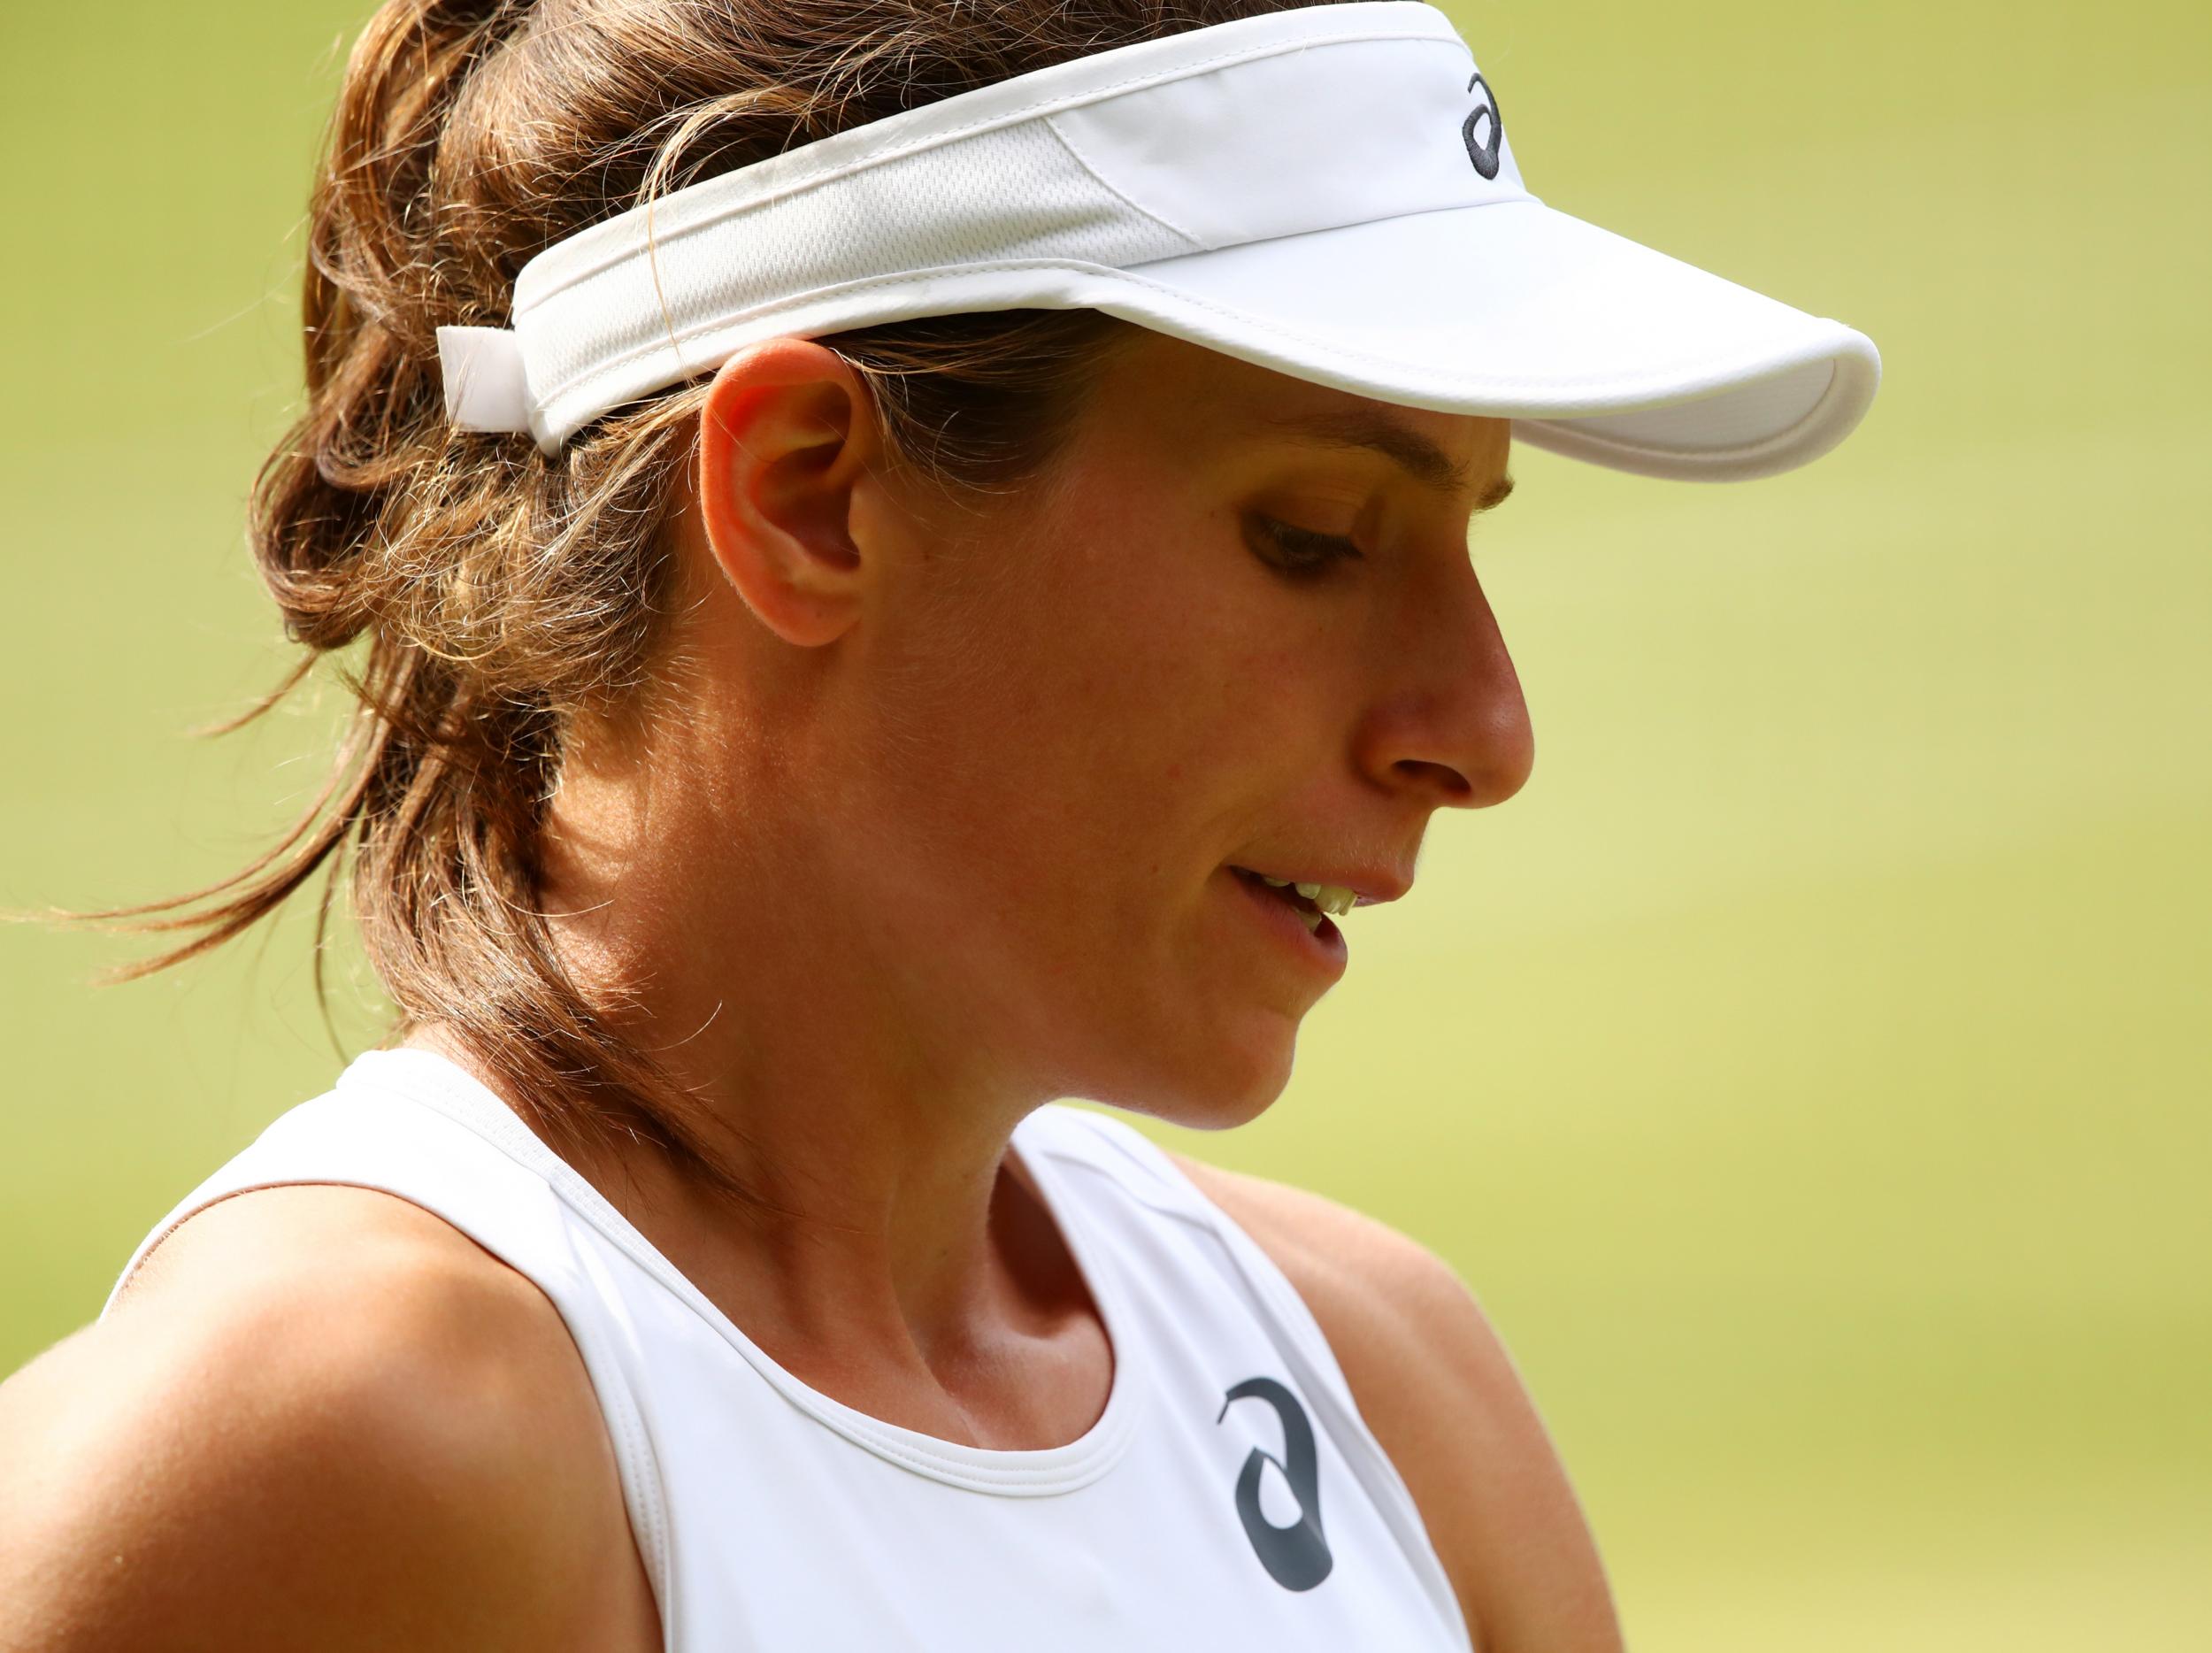 Konta has been knocked out of Wimbledon